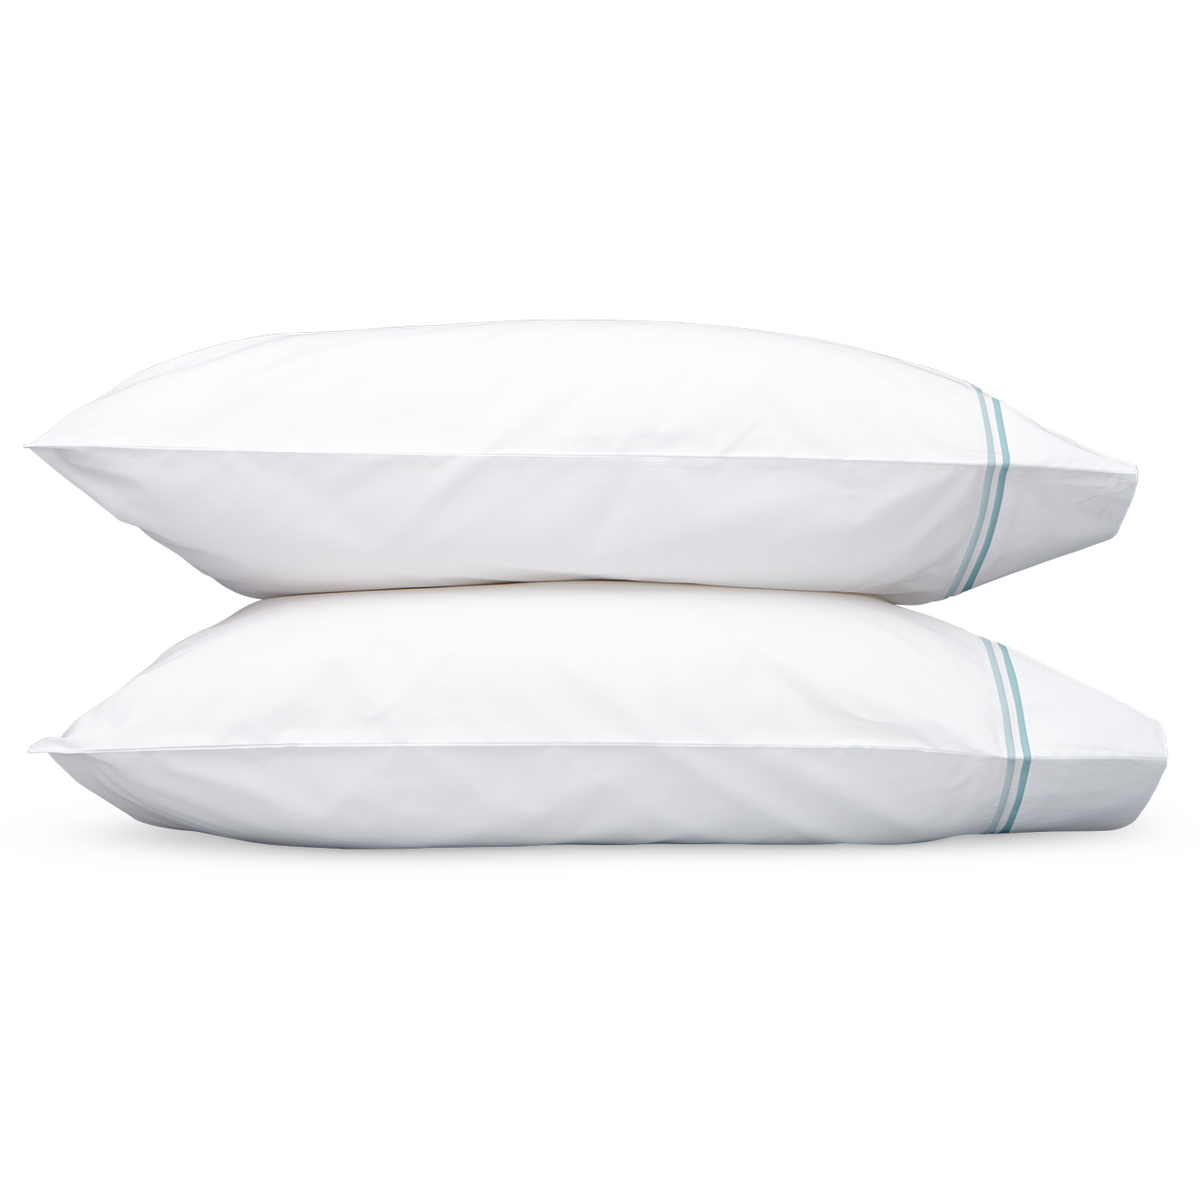 Matouk Essex High End Bed Pair of Two Pillowcases - Pool